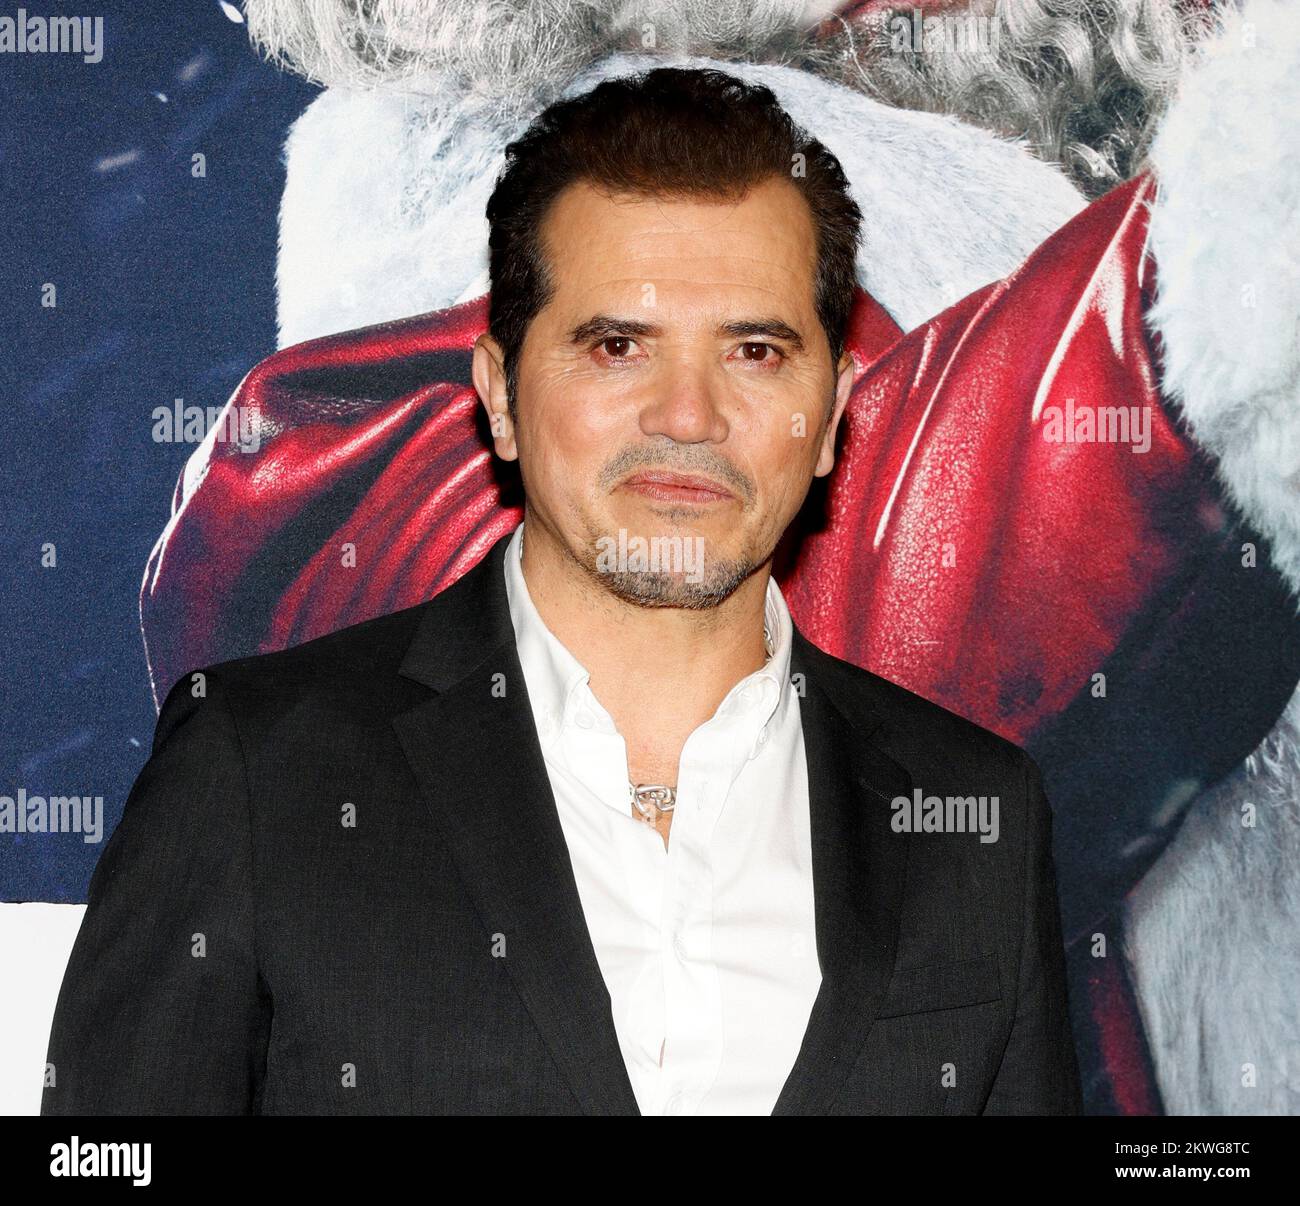 Los Angeles, CA,  - Nov 29, 2022: John Leguizamo arrives at the movie premiere of 'Violent Night' at TCL Chinese Theatre Stock Photo